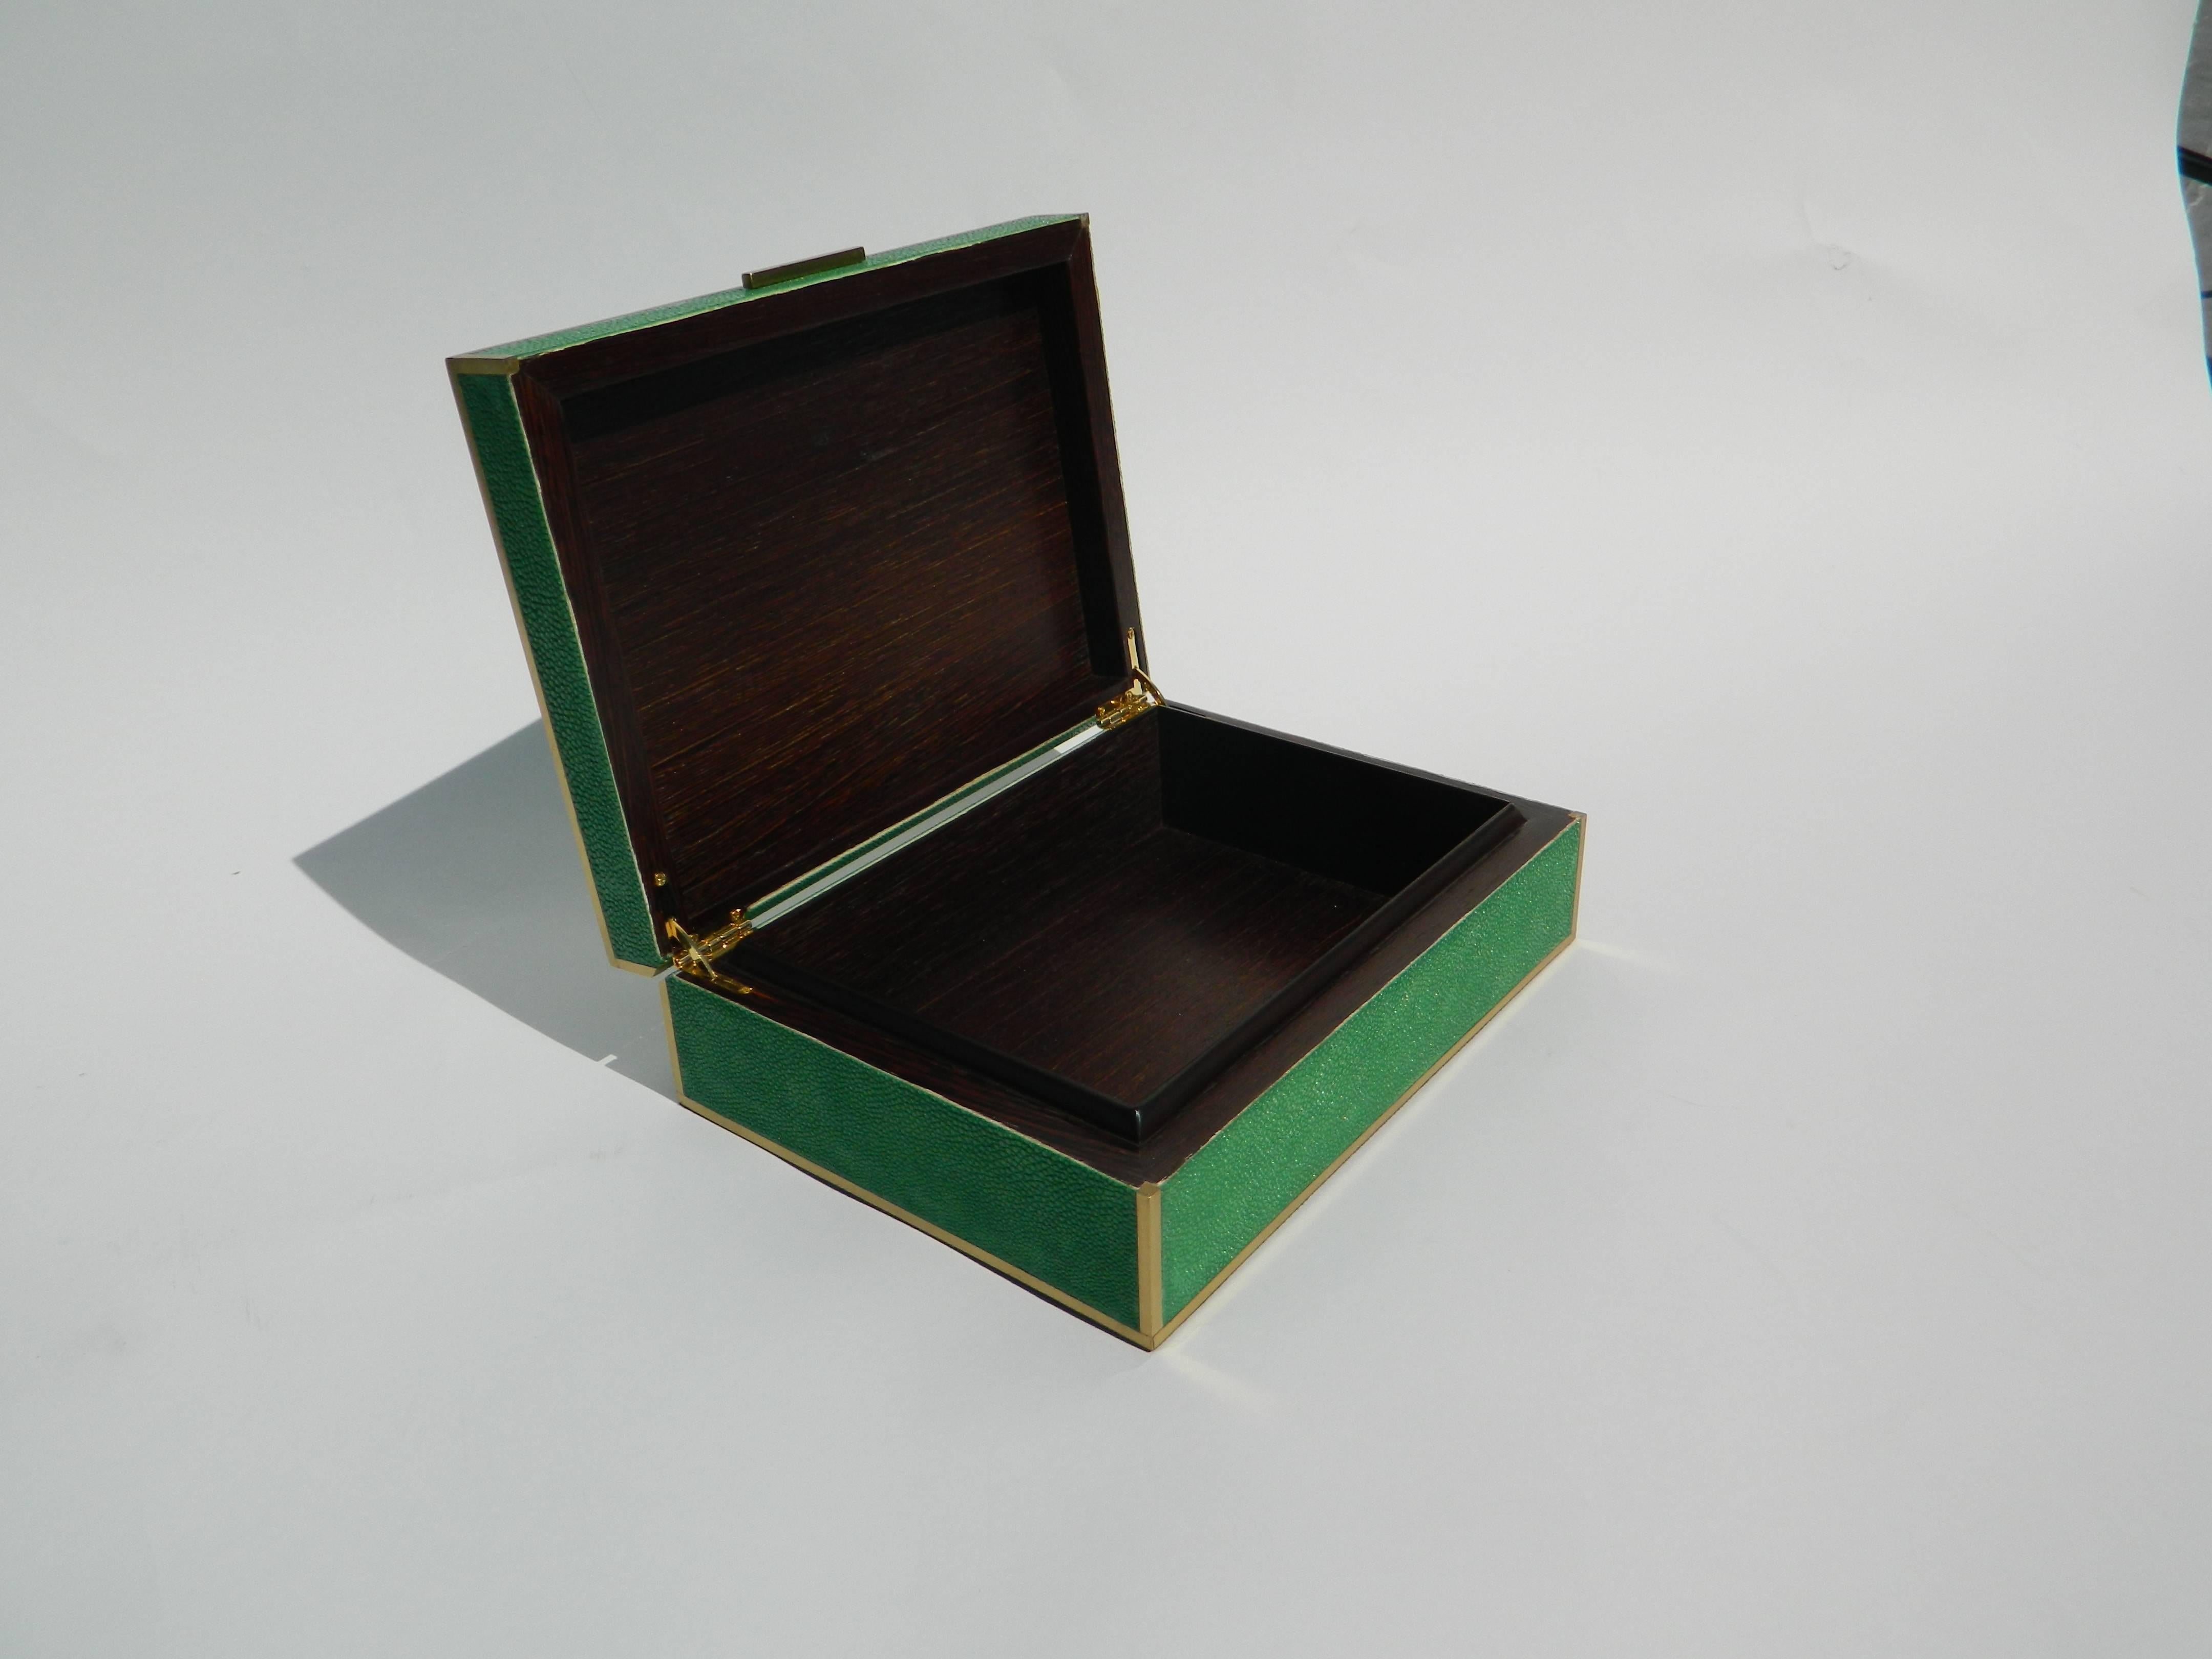 Beautiful emerald green shagreen box with brass inlay.
Galart specializes in boxes, humidors, trays, lamps and other high quality objects. We can custom make any shape, color and size.
Please contact us for any other information.